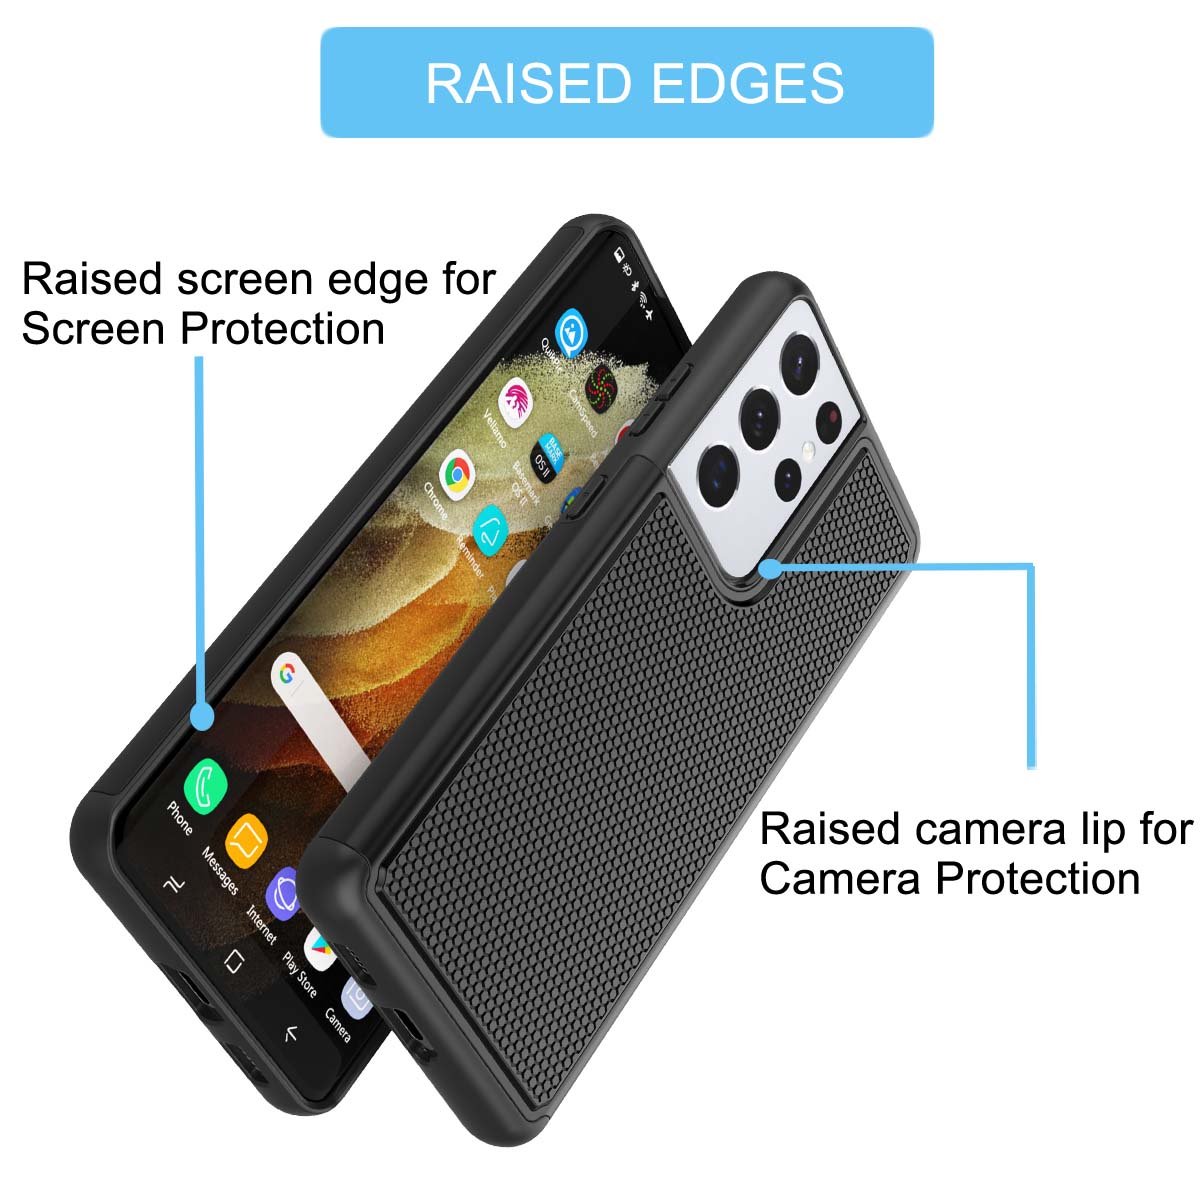 Galaxy S21 Plus Case, 6.7" Galaxy S21+ Cute Phone Case, Takfox Shock Absorbing Rubber Silicone Plastic Scratch Resistant Bumper Grip Rugged Sturdy Hard Case Cover for Samsung Galaxy S21 Plus, Black - image 3 of 6